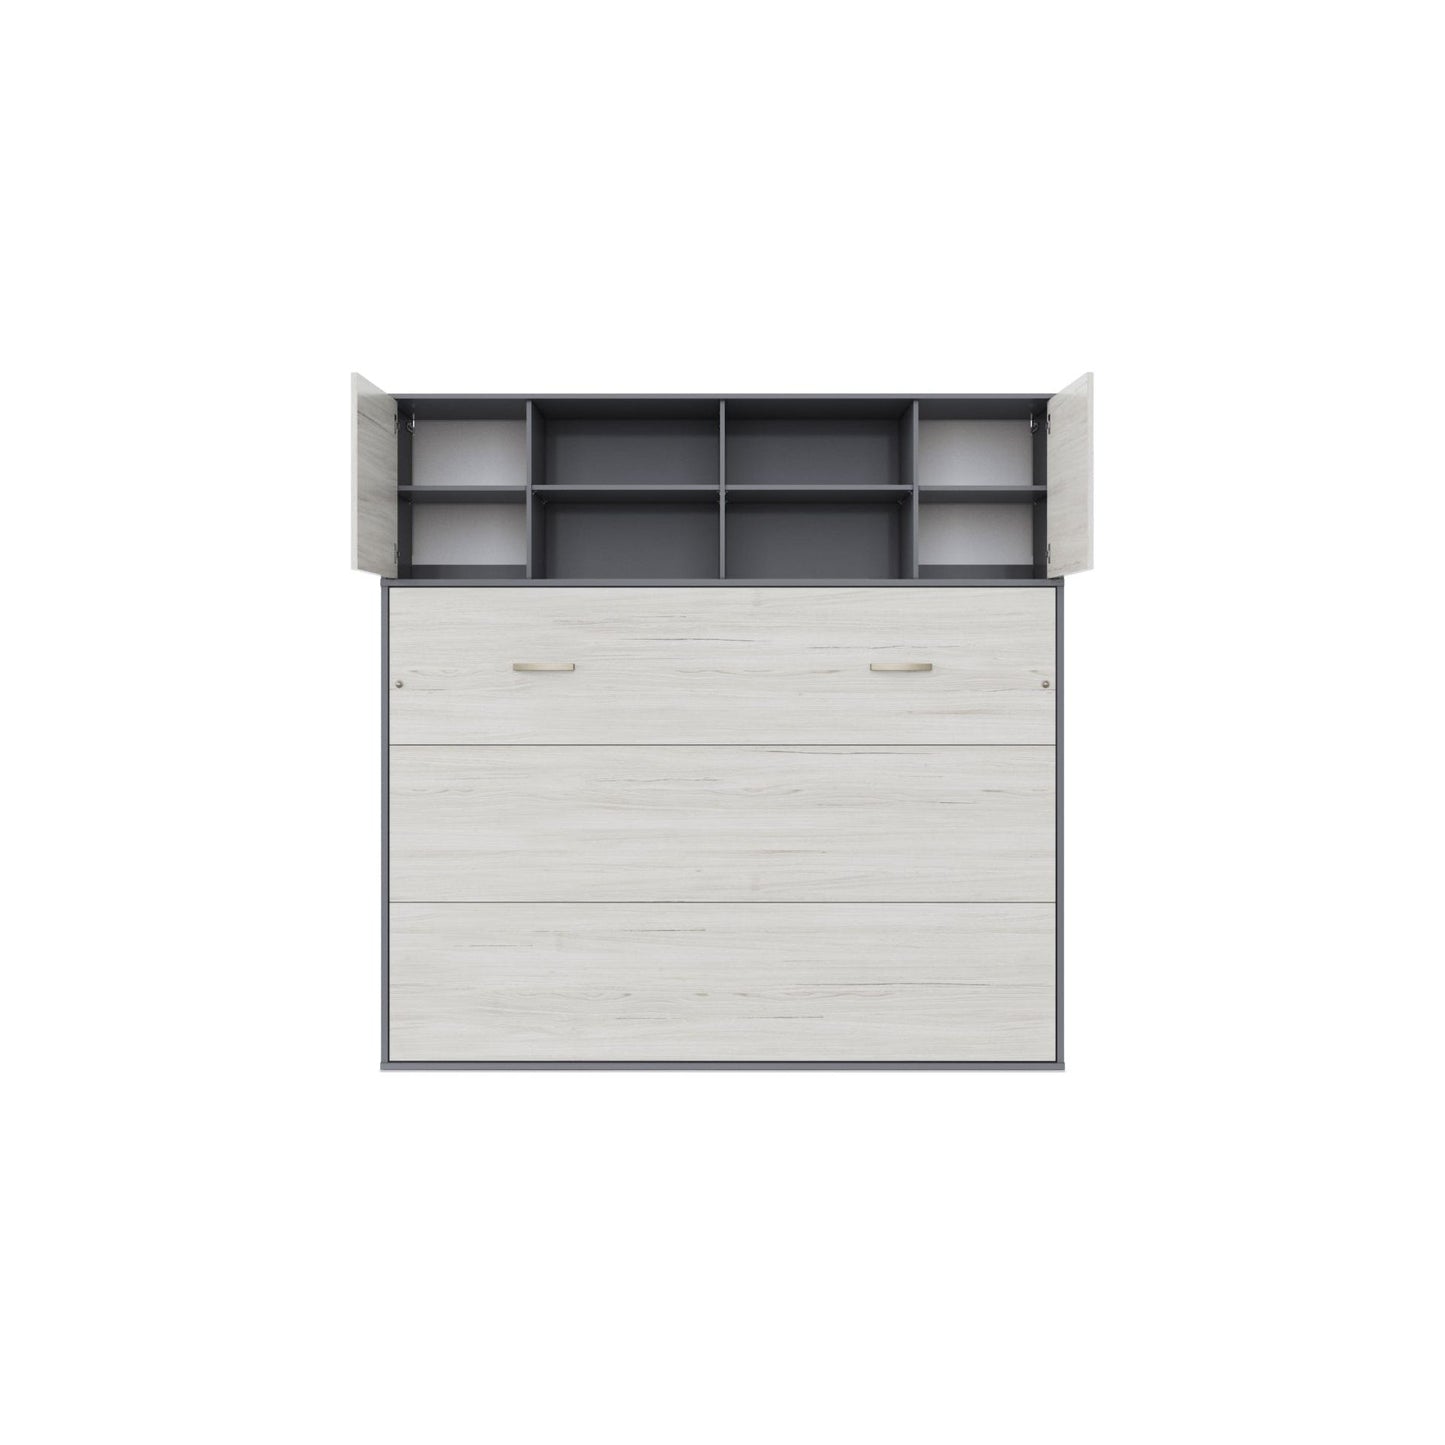 Maxima House Maxima House Invento Horizontal Wall Bed, European Full Size with a cabinet on top